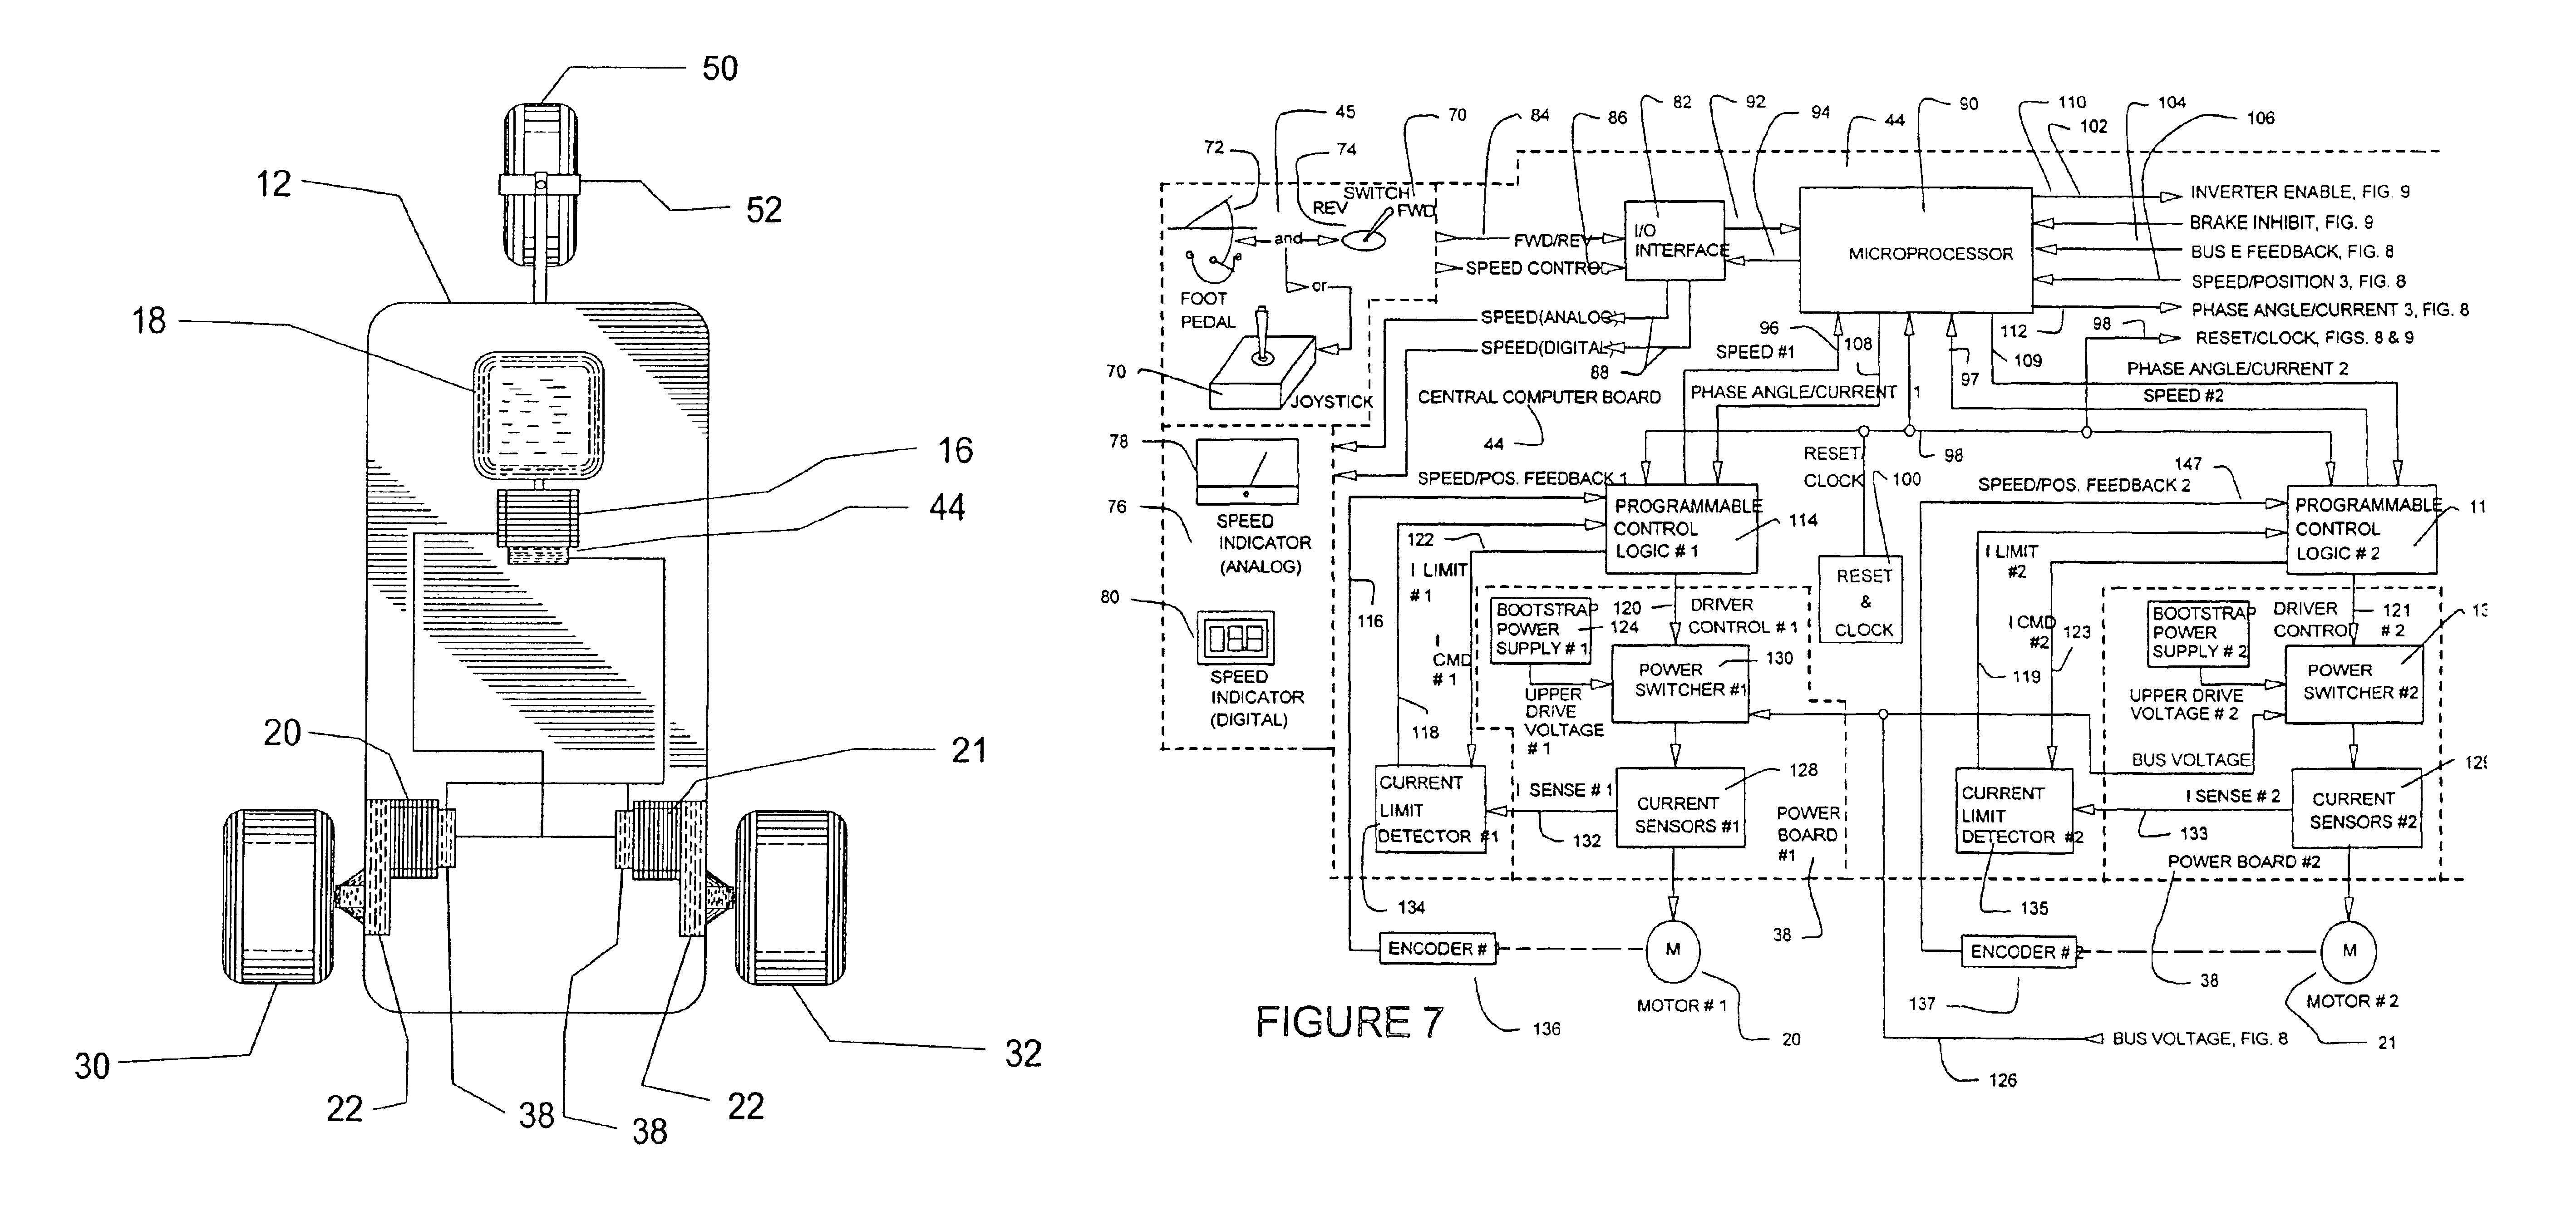 Electric generator and motor drive system